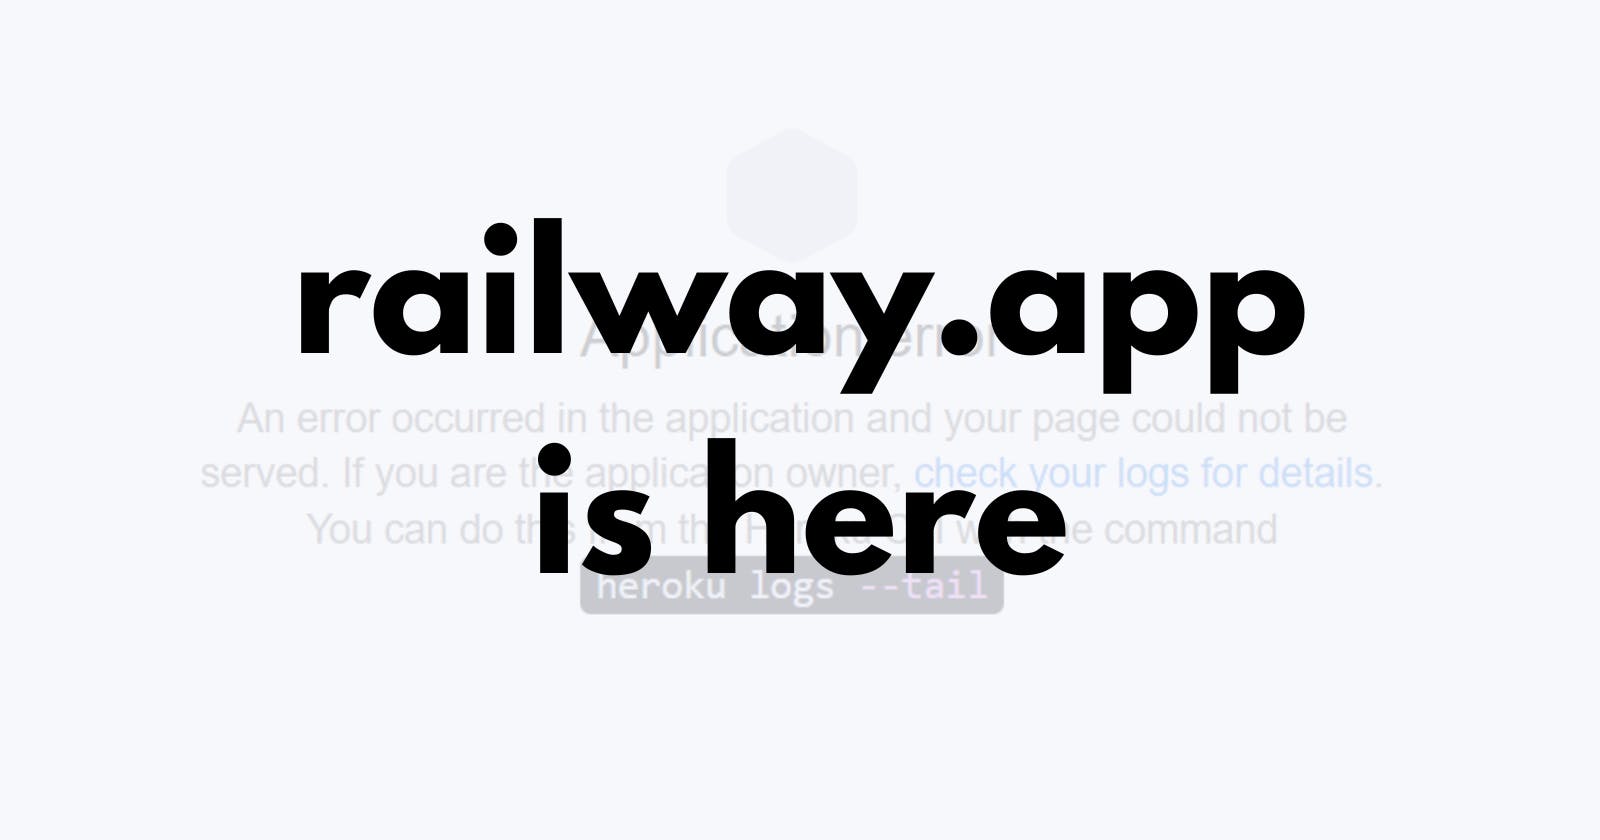 A quick and easy alternative to Heroku is Railway.app